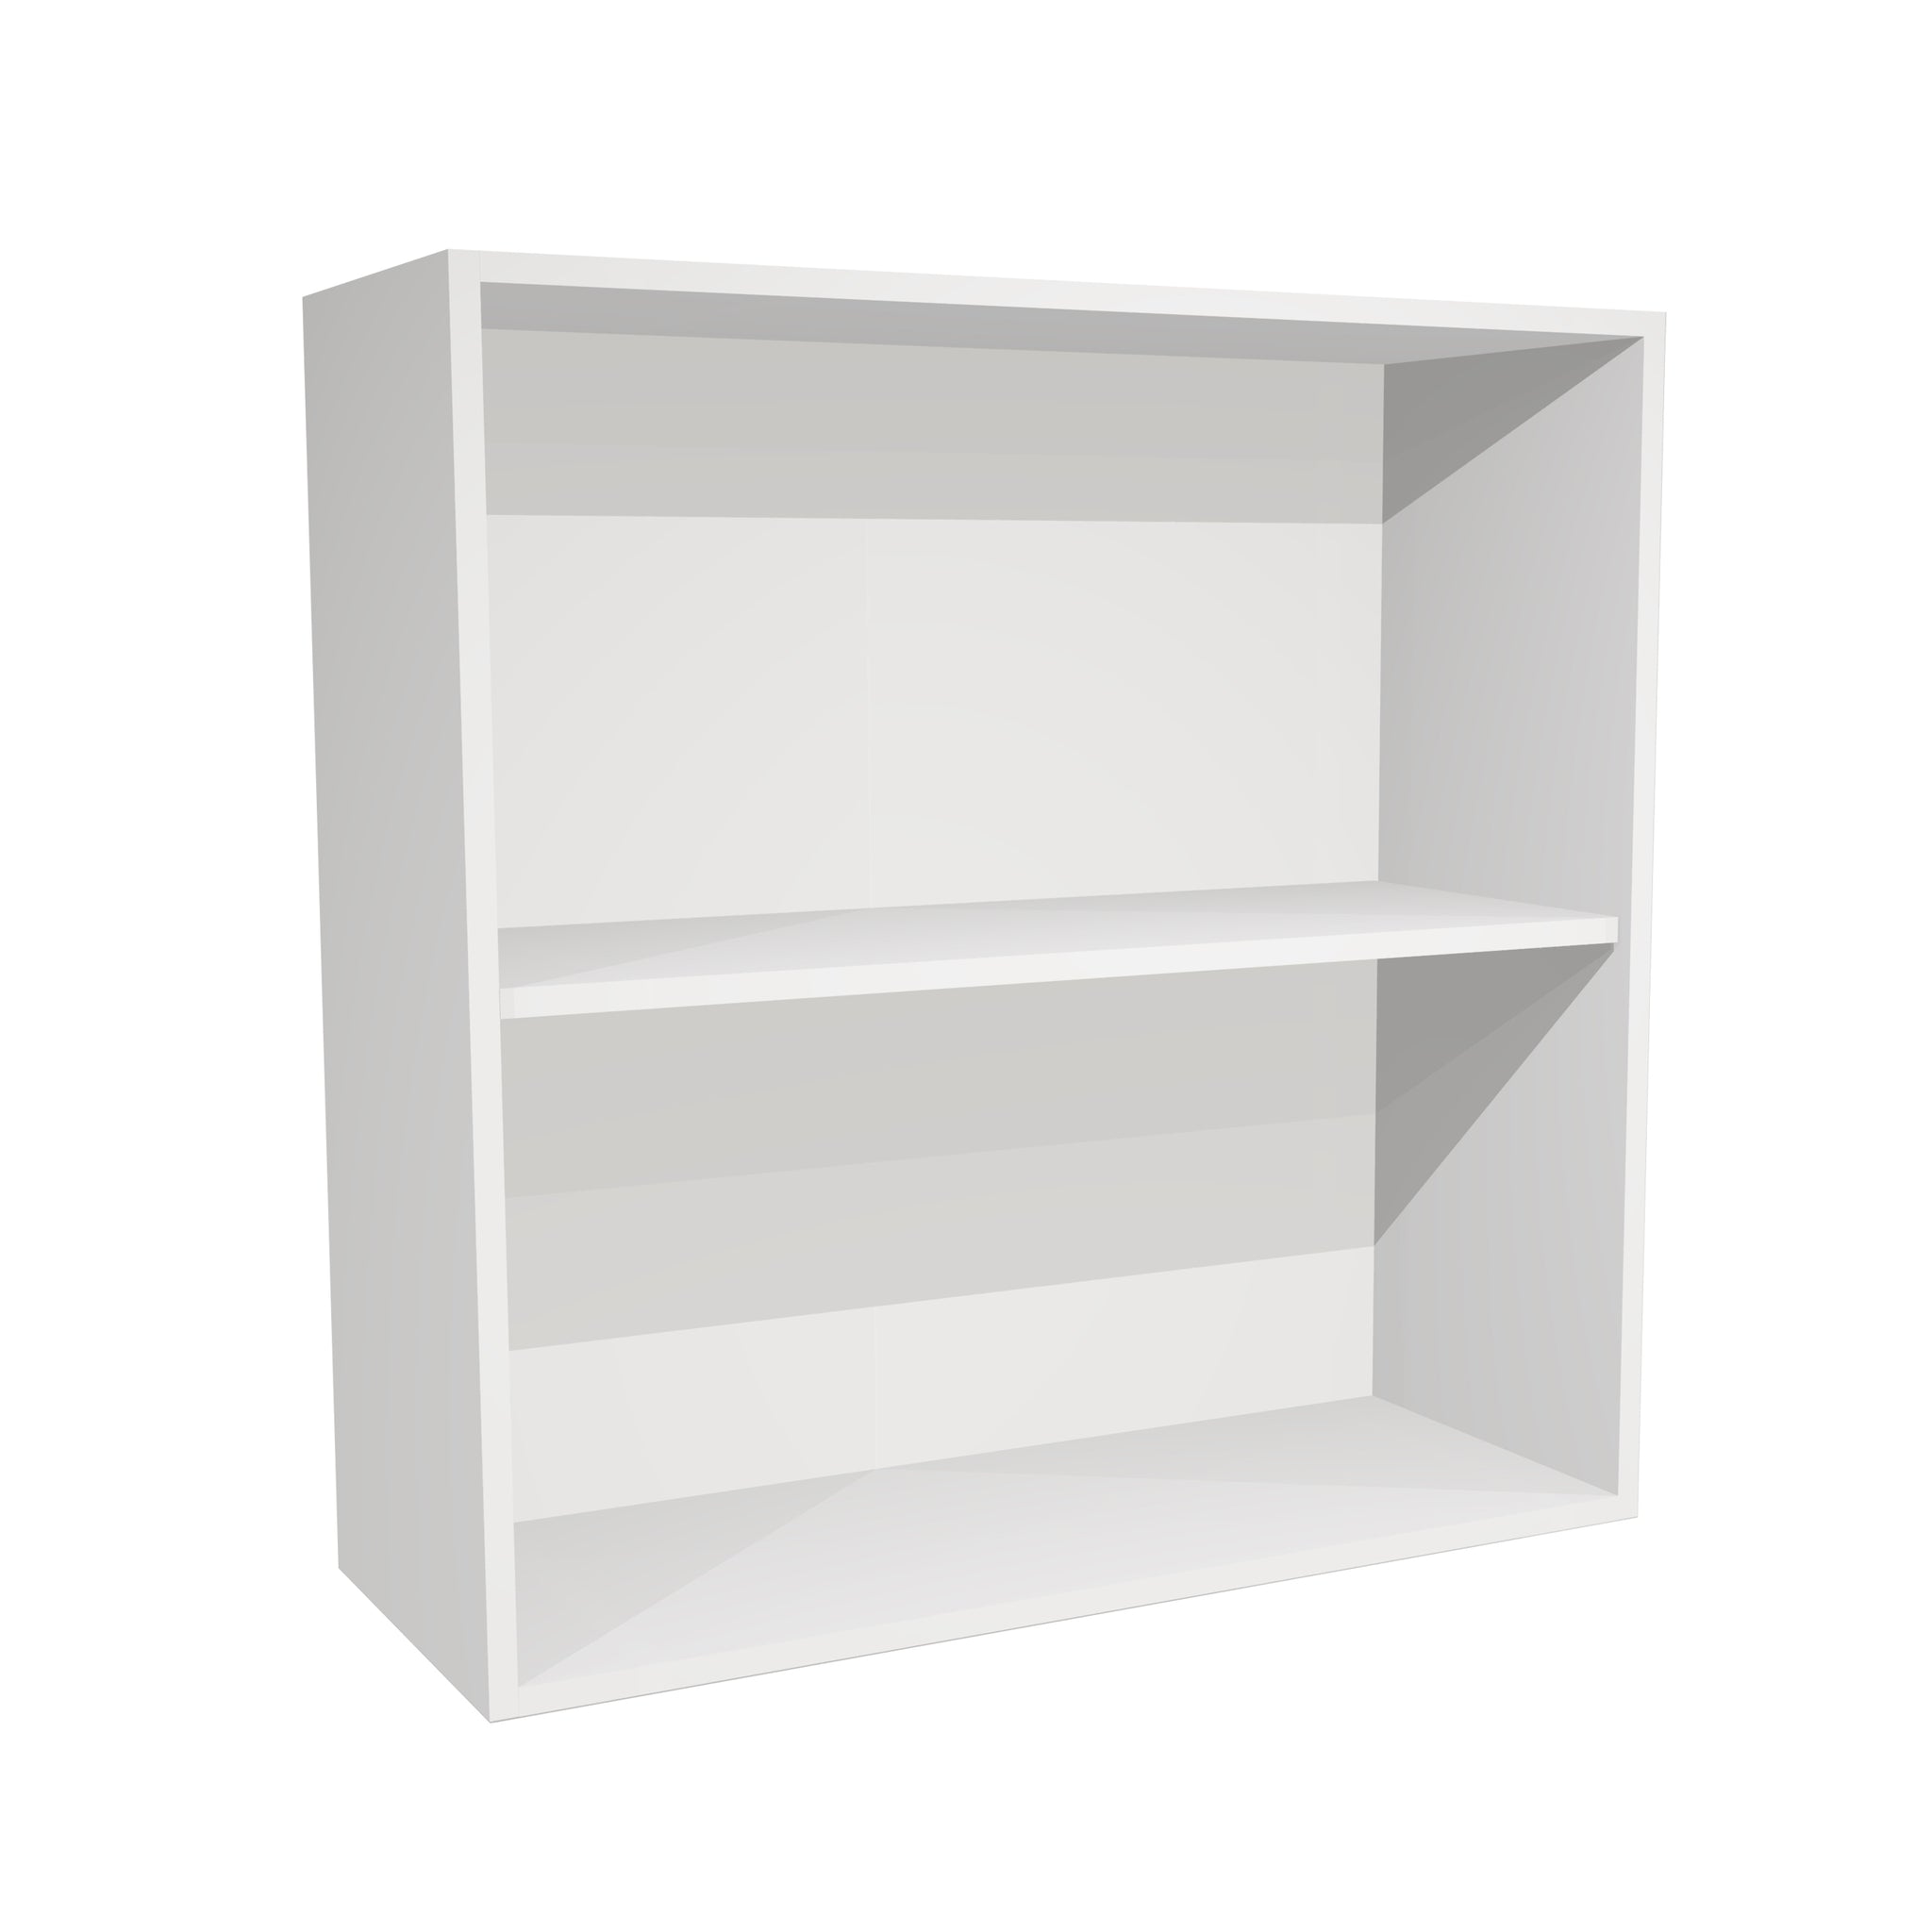 RTA - Glossy White - Wall Open Cabinet | 36"W x 30"H x 12"D